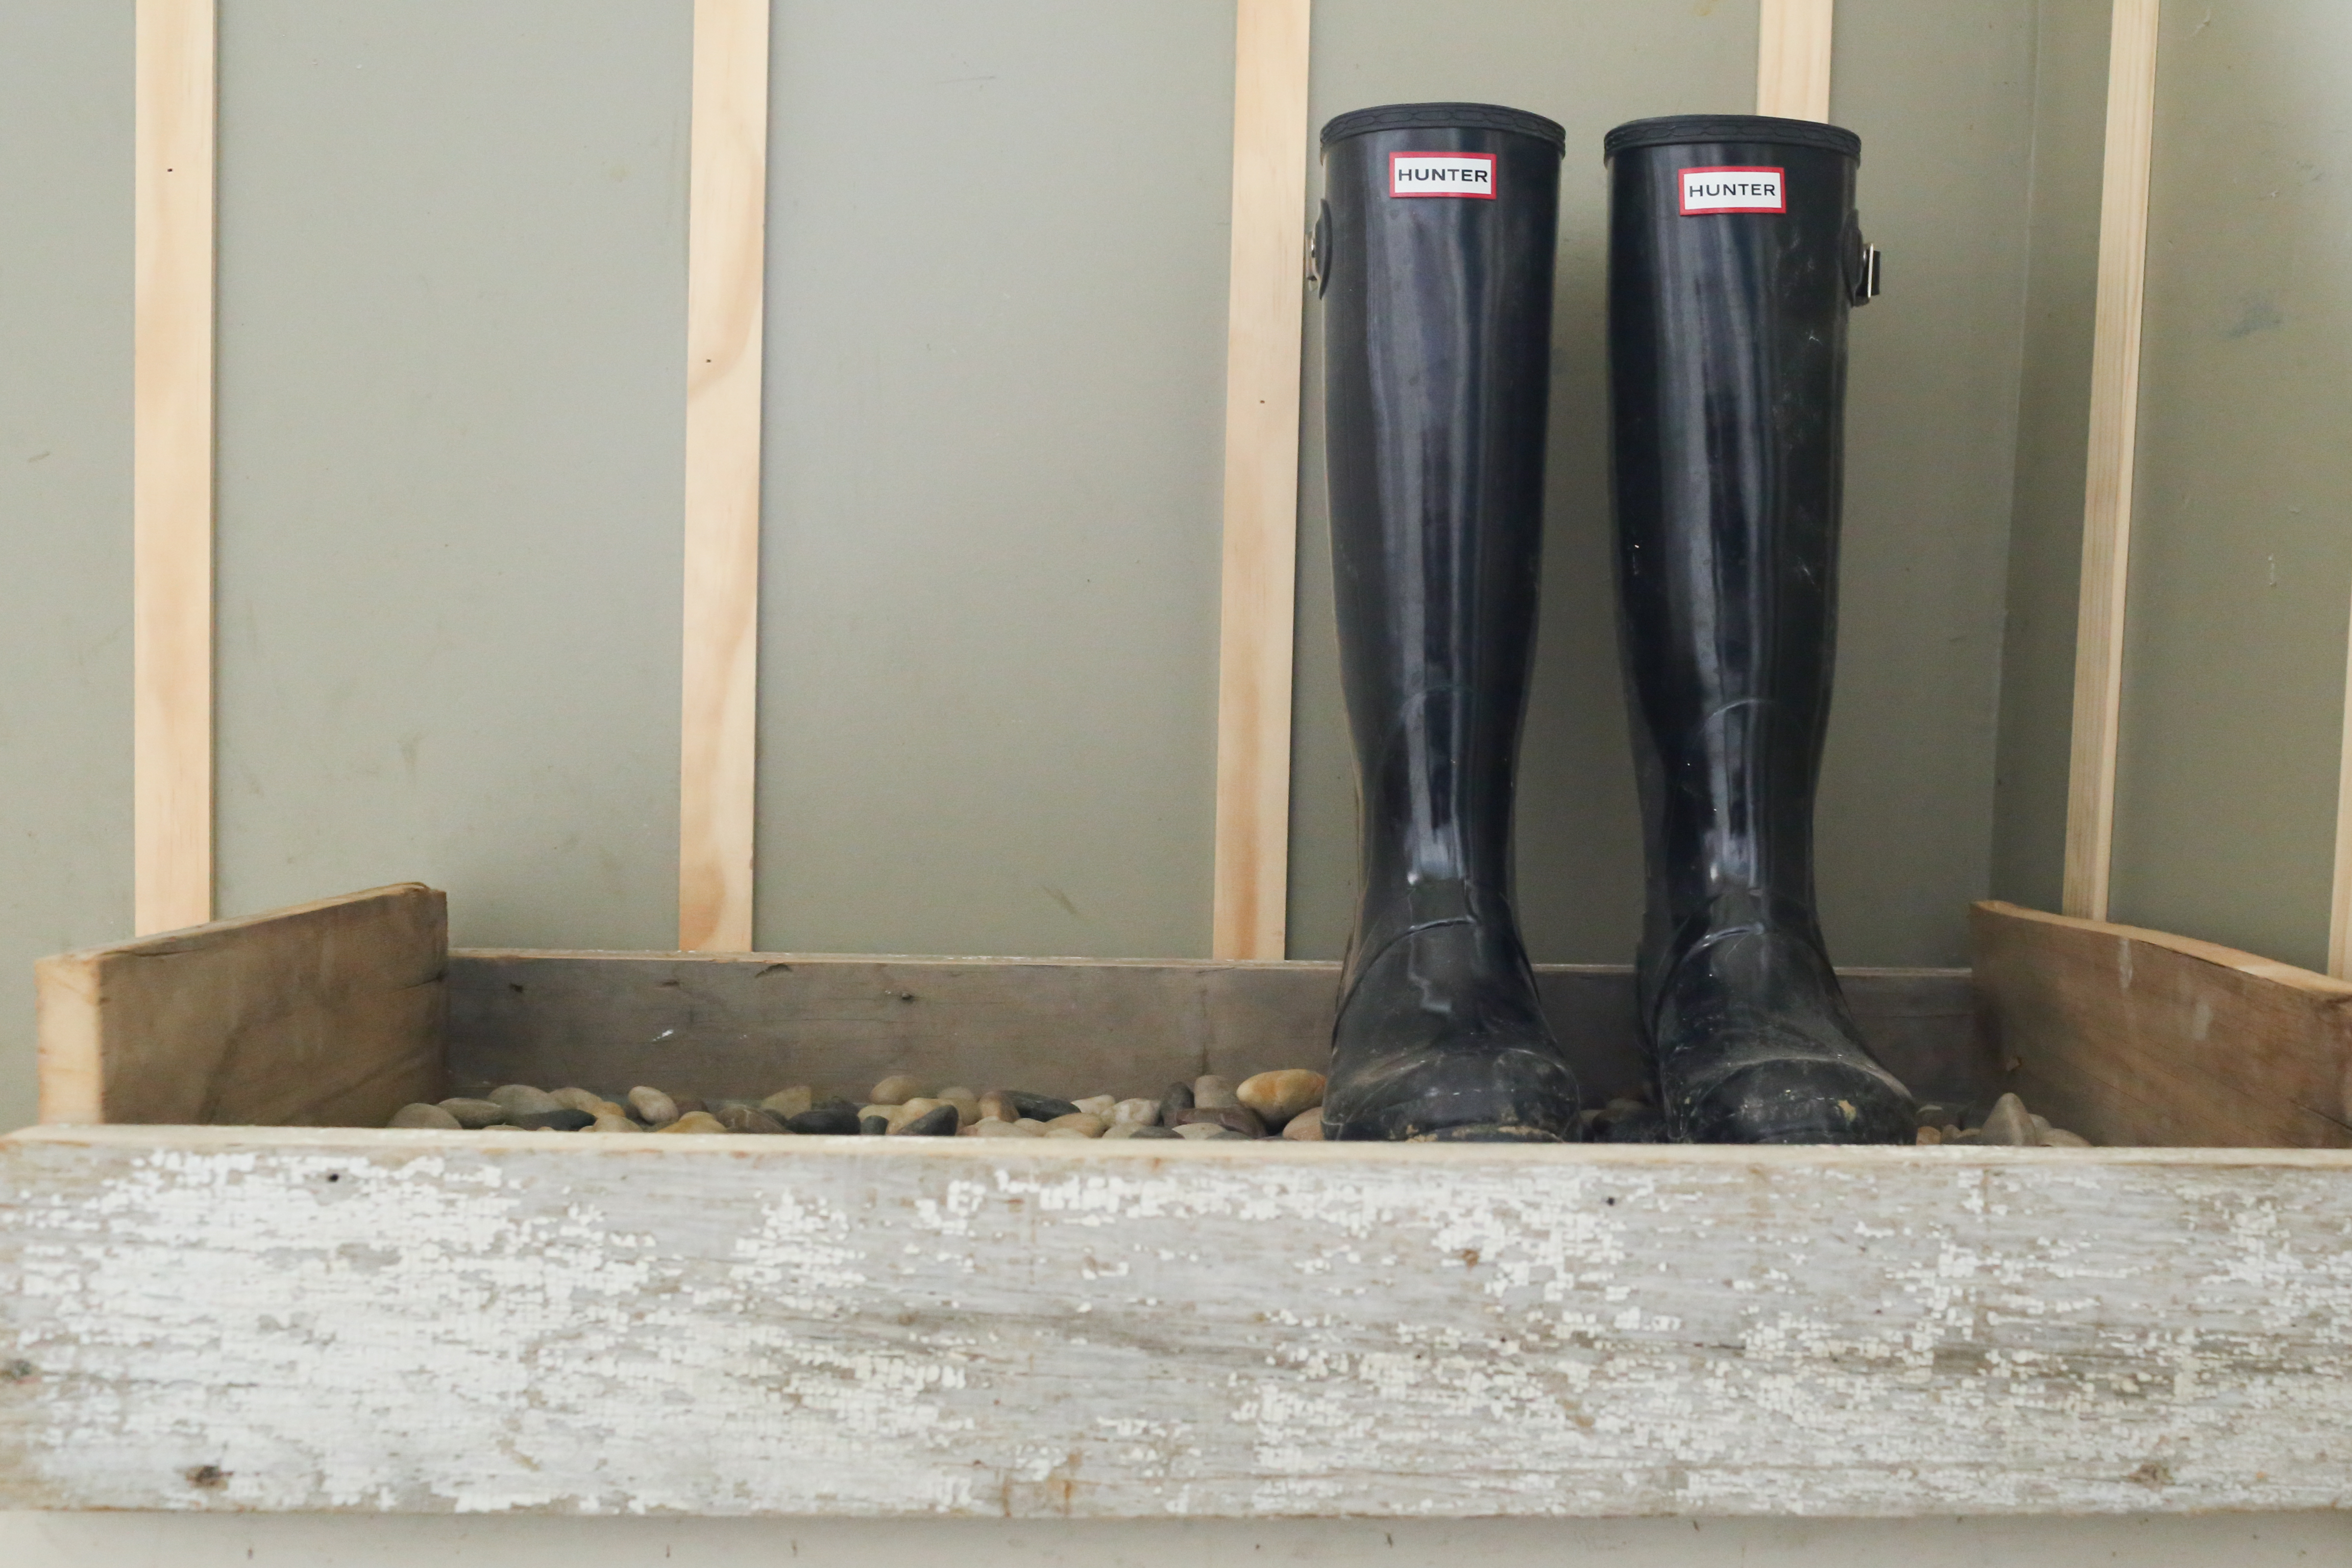 The farmhouse boot tray helps drain the boots and keeps them in place in style.